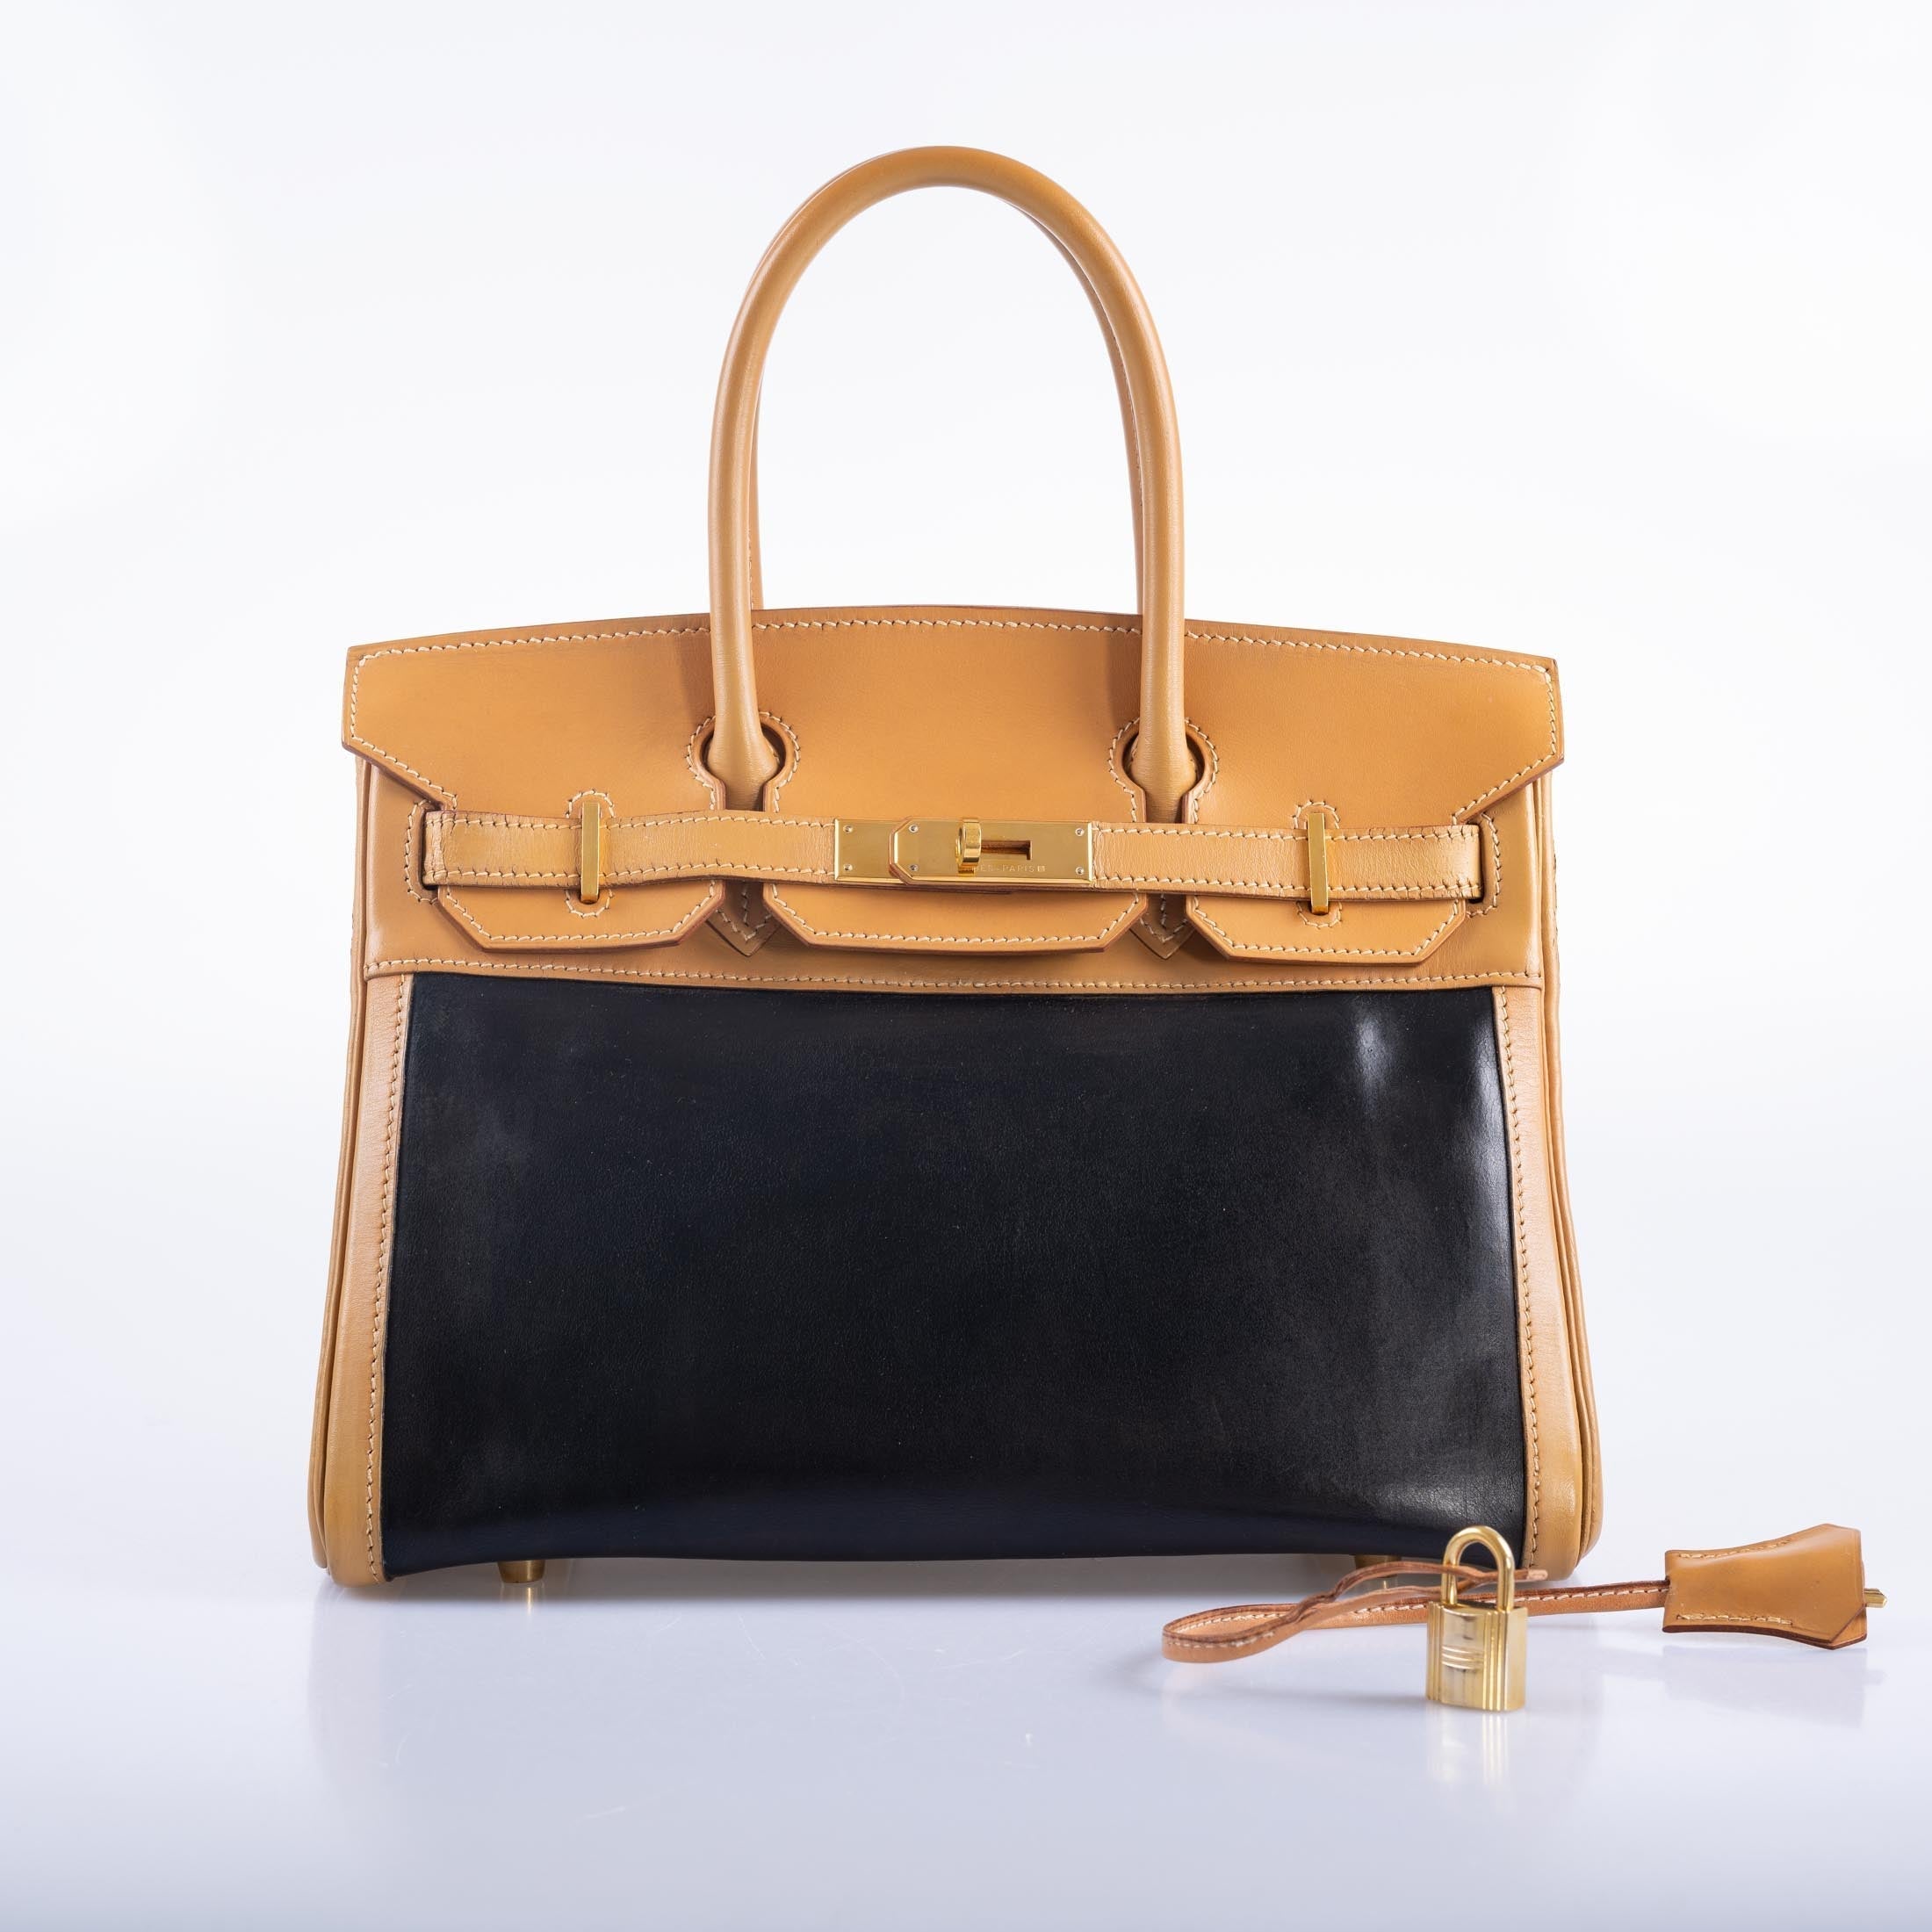 Hermès Birkin 30 Vintage Limited Edition Natural Amazonia with Gold Hardware